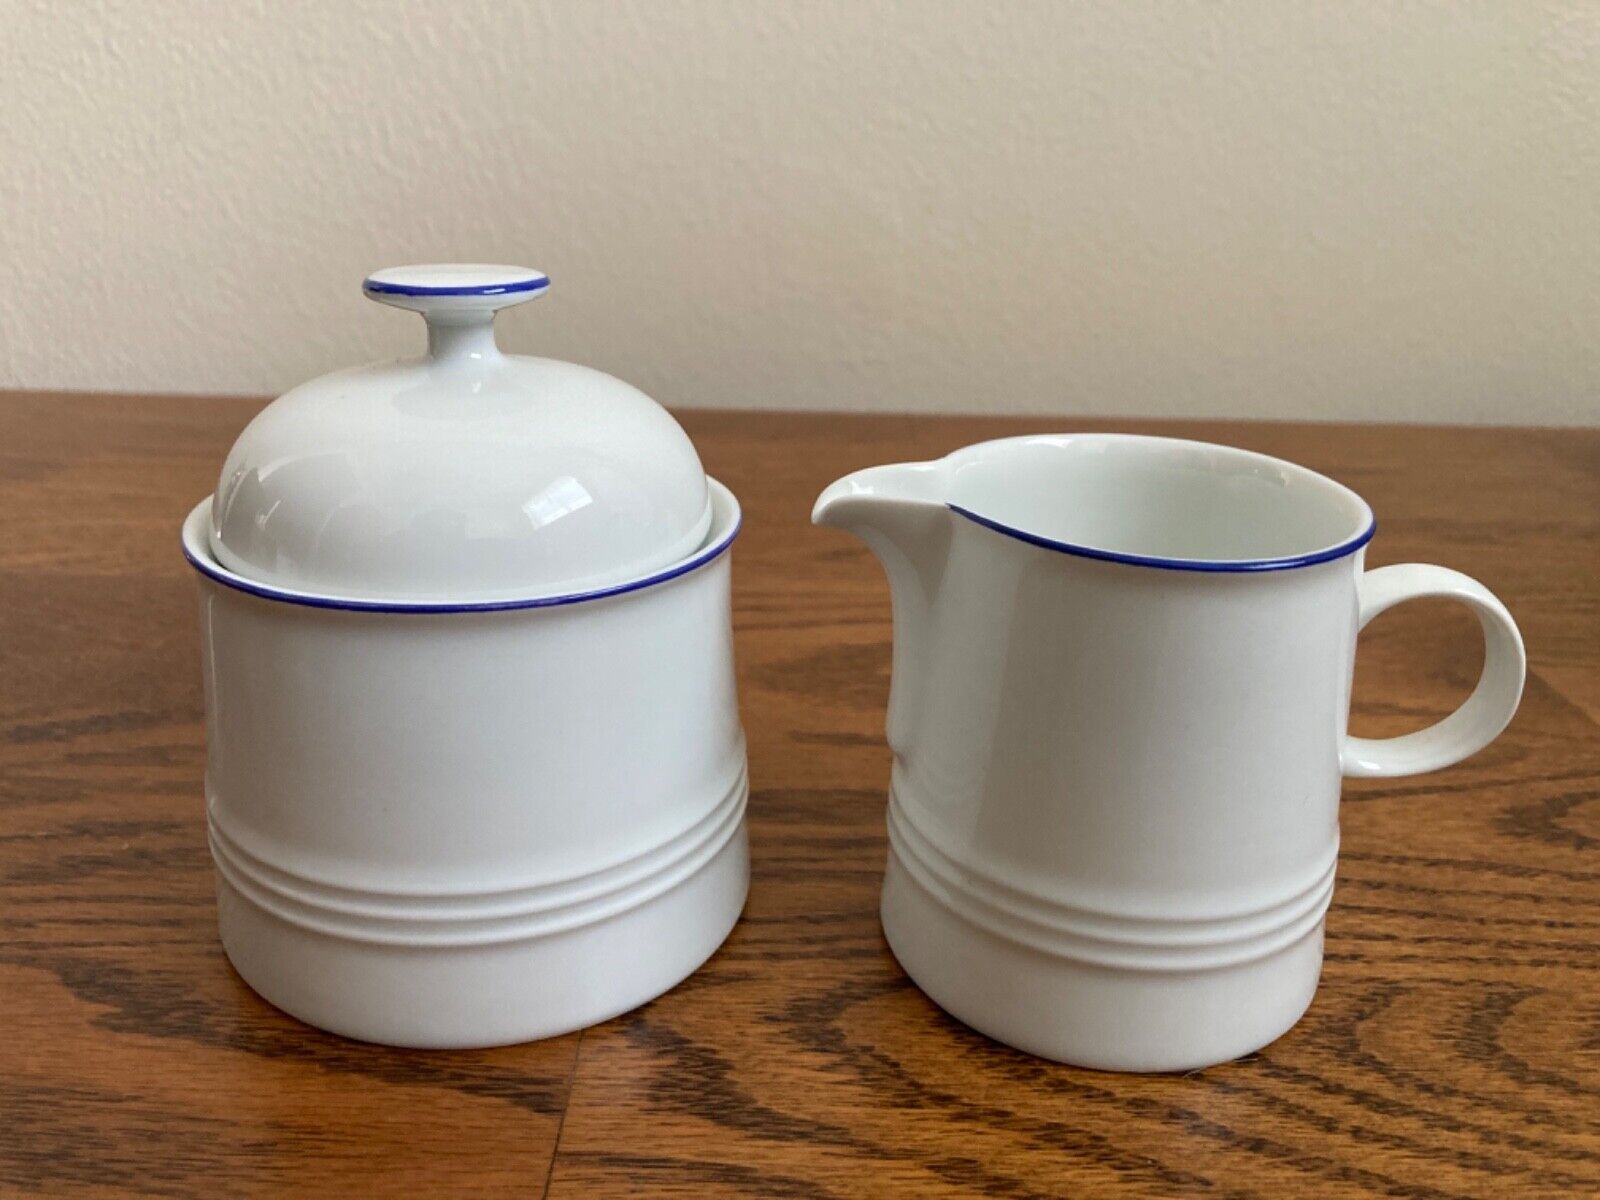 MELITTA Sugar Bowl & Creamer Pitcher White w/ Blue MADE IN GERMANY Never Used